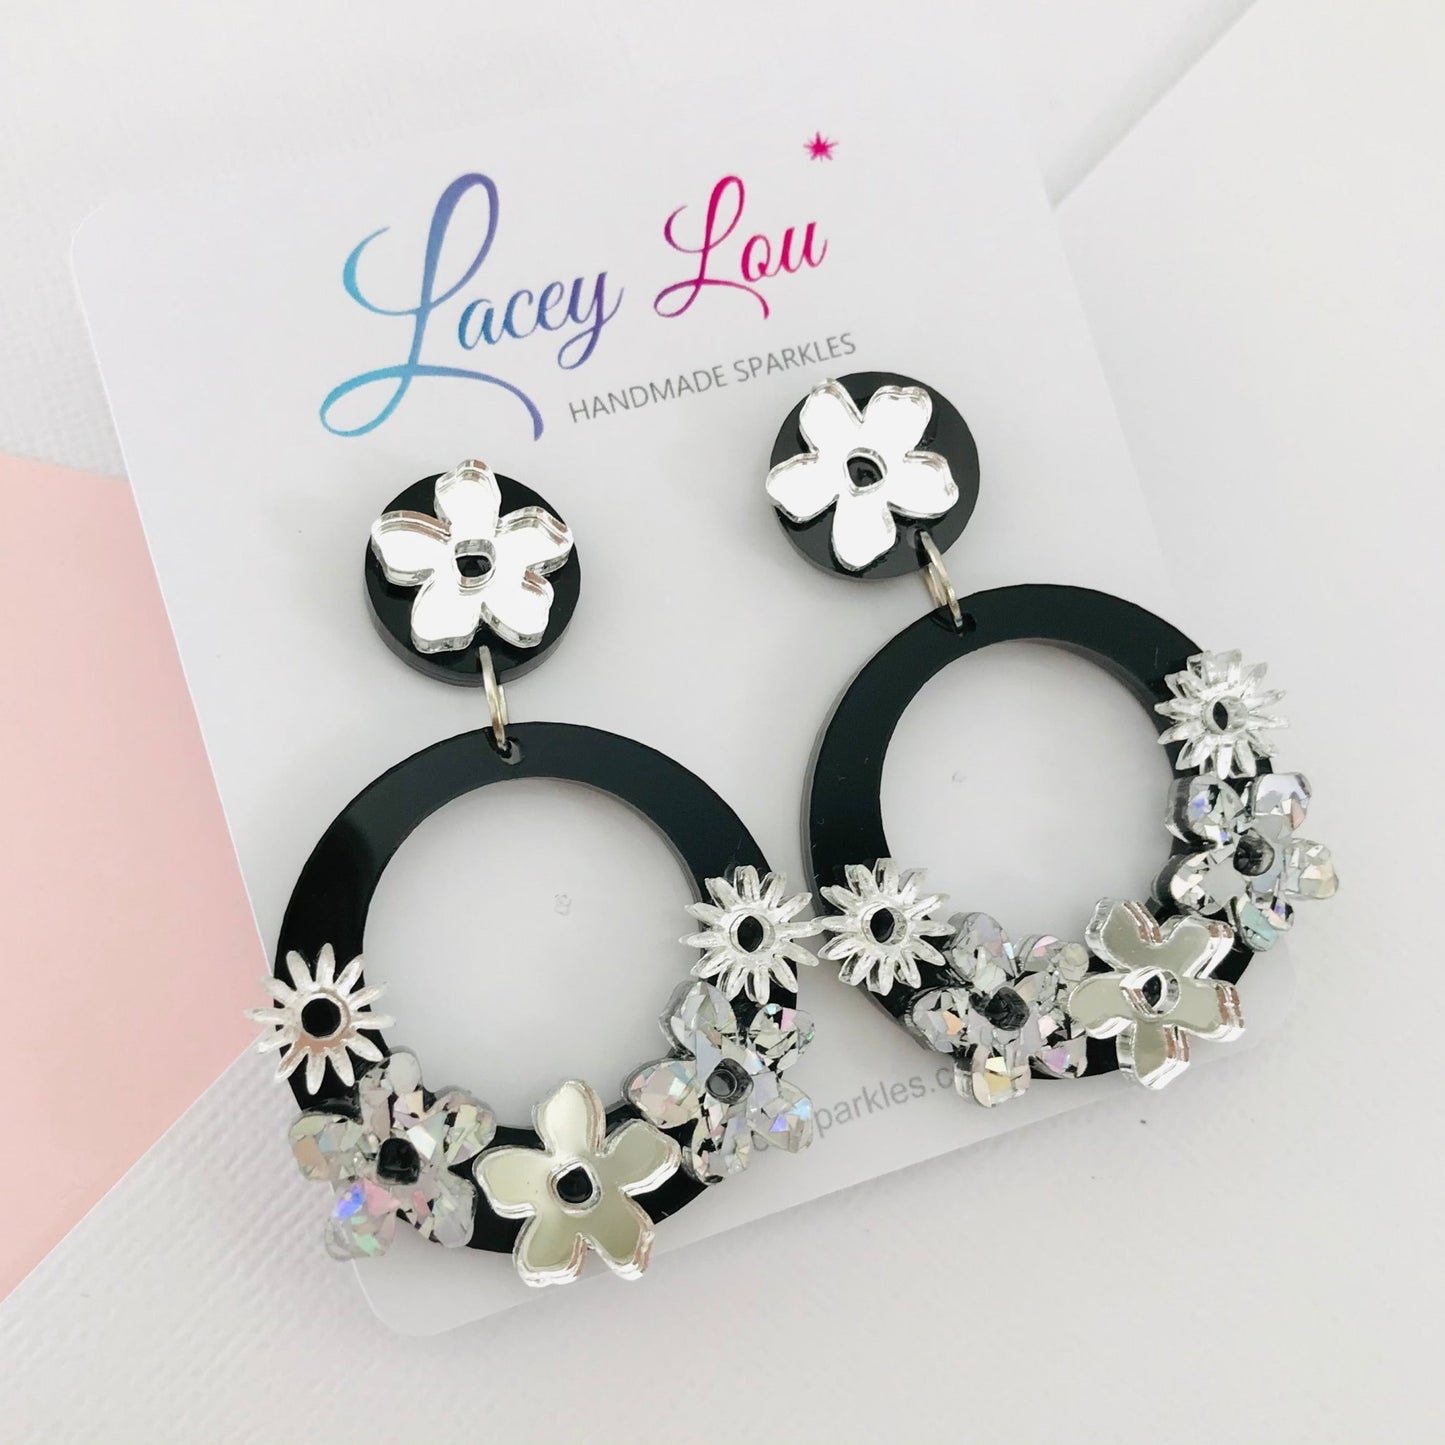 Statement Round Floral Dangles - Silver and Black Acrylic Earrings - Lacey Lou Sparkles